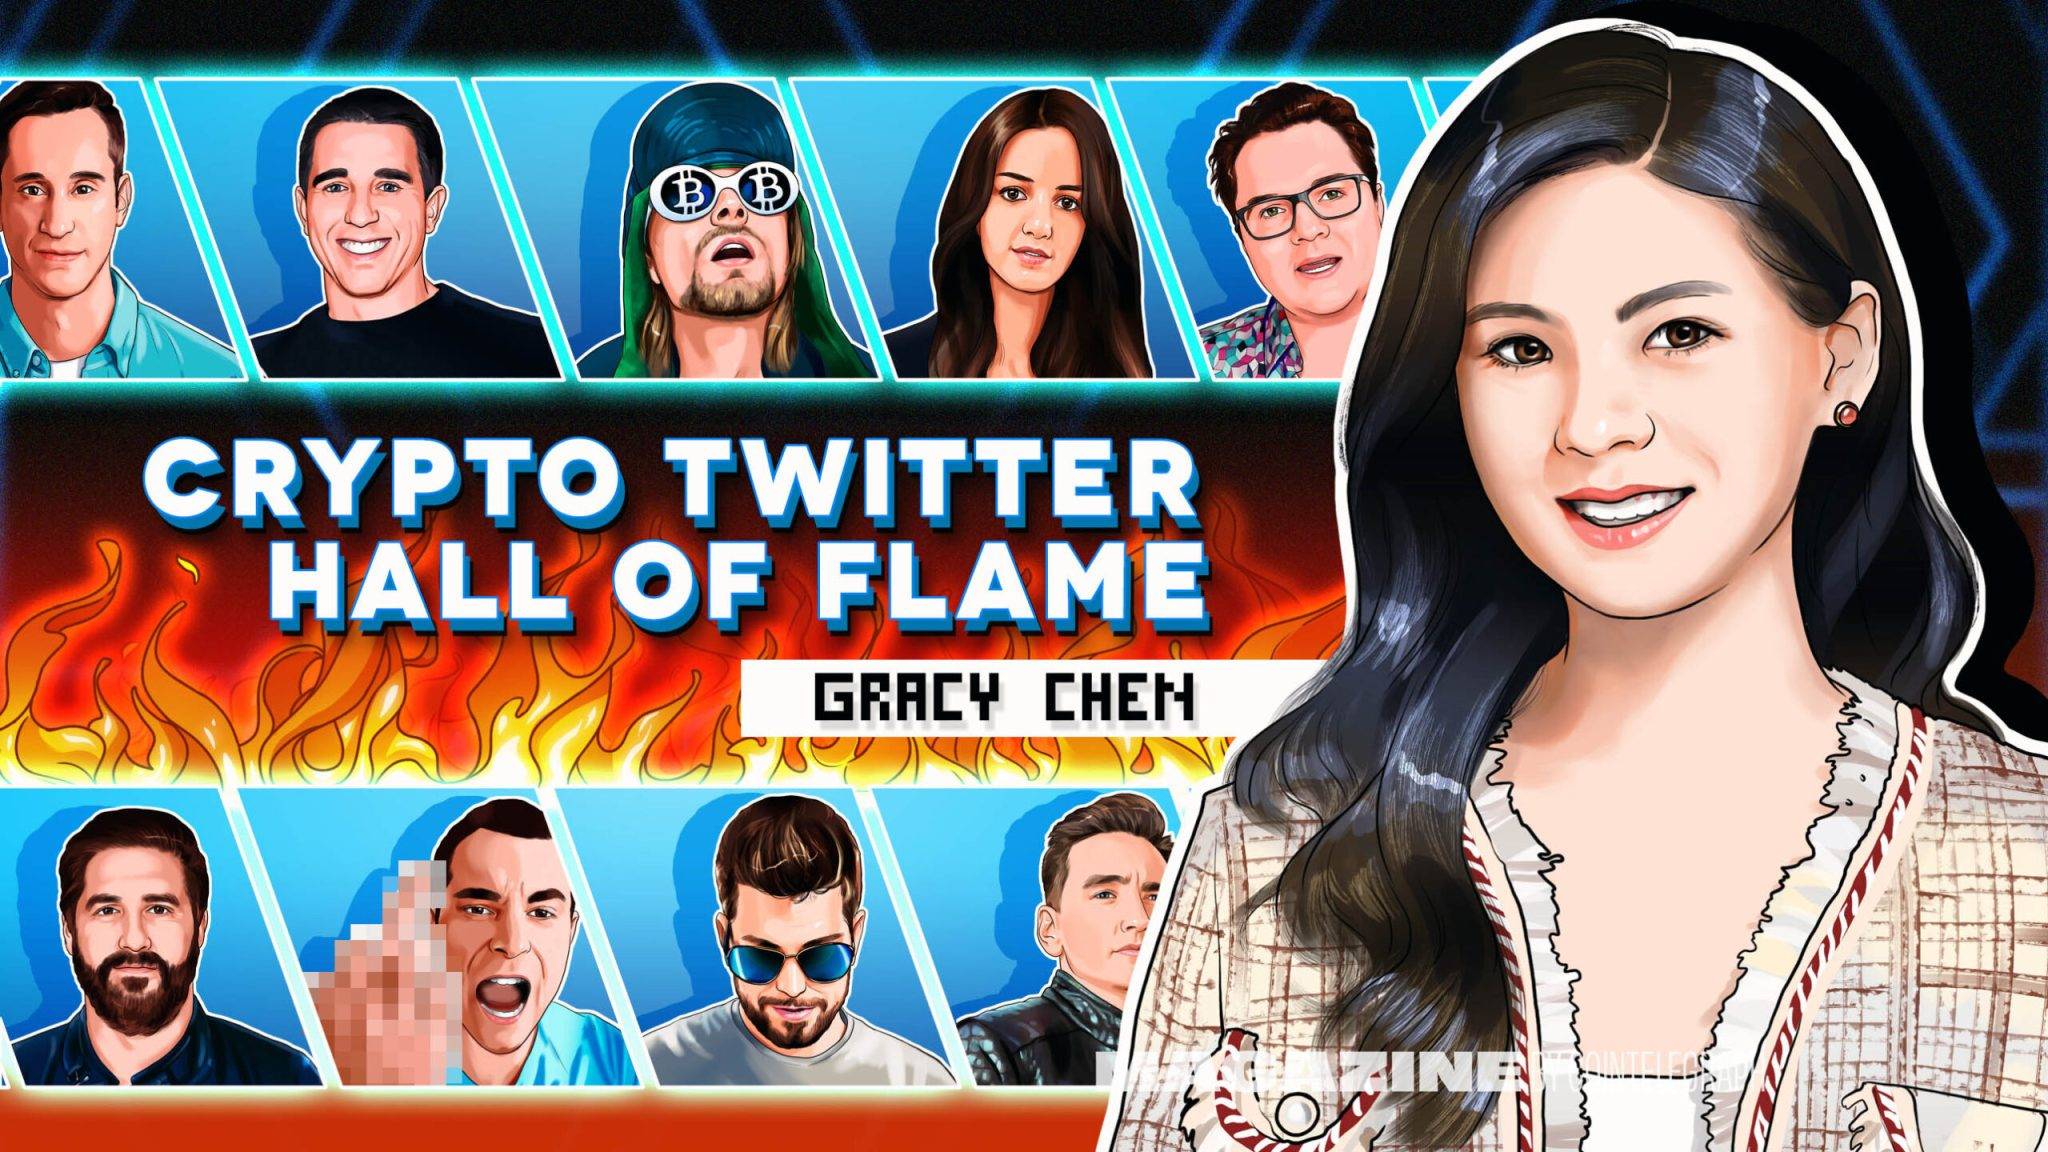 Bitcoin ETF optimist and Worldcoin skeptic Gracy Chen: Hall of Flame